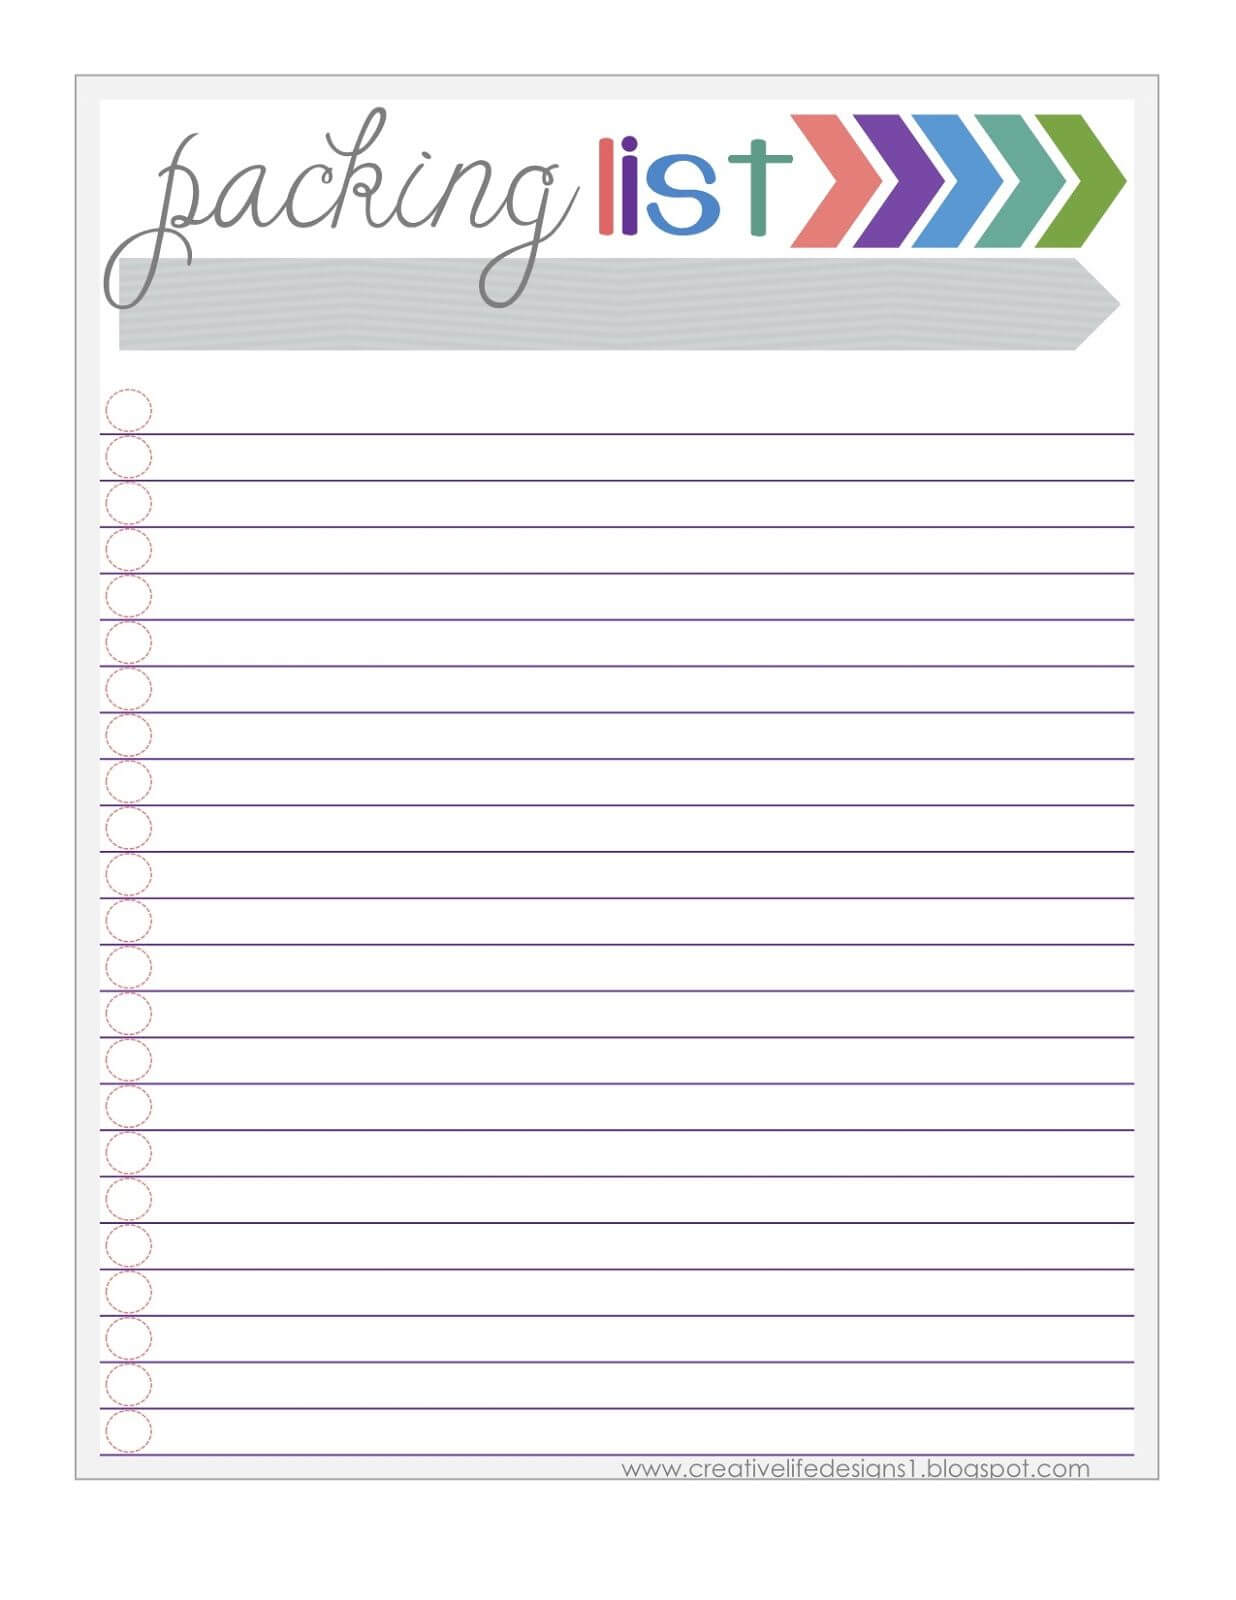 Free Packing List Printable Creative Life Designs Intended For Blank Packing List Template